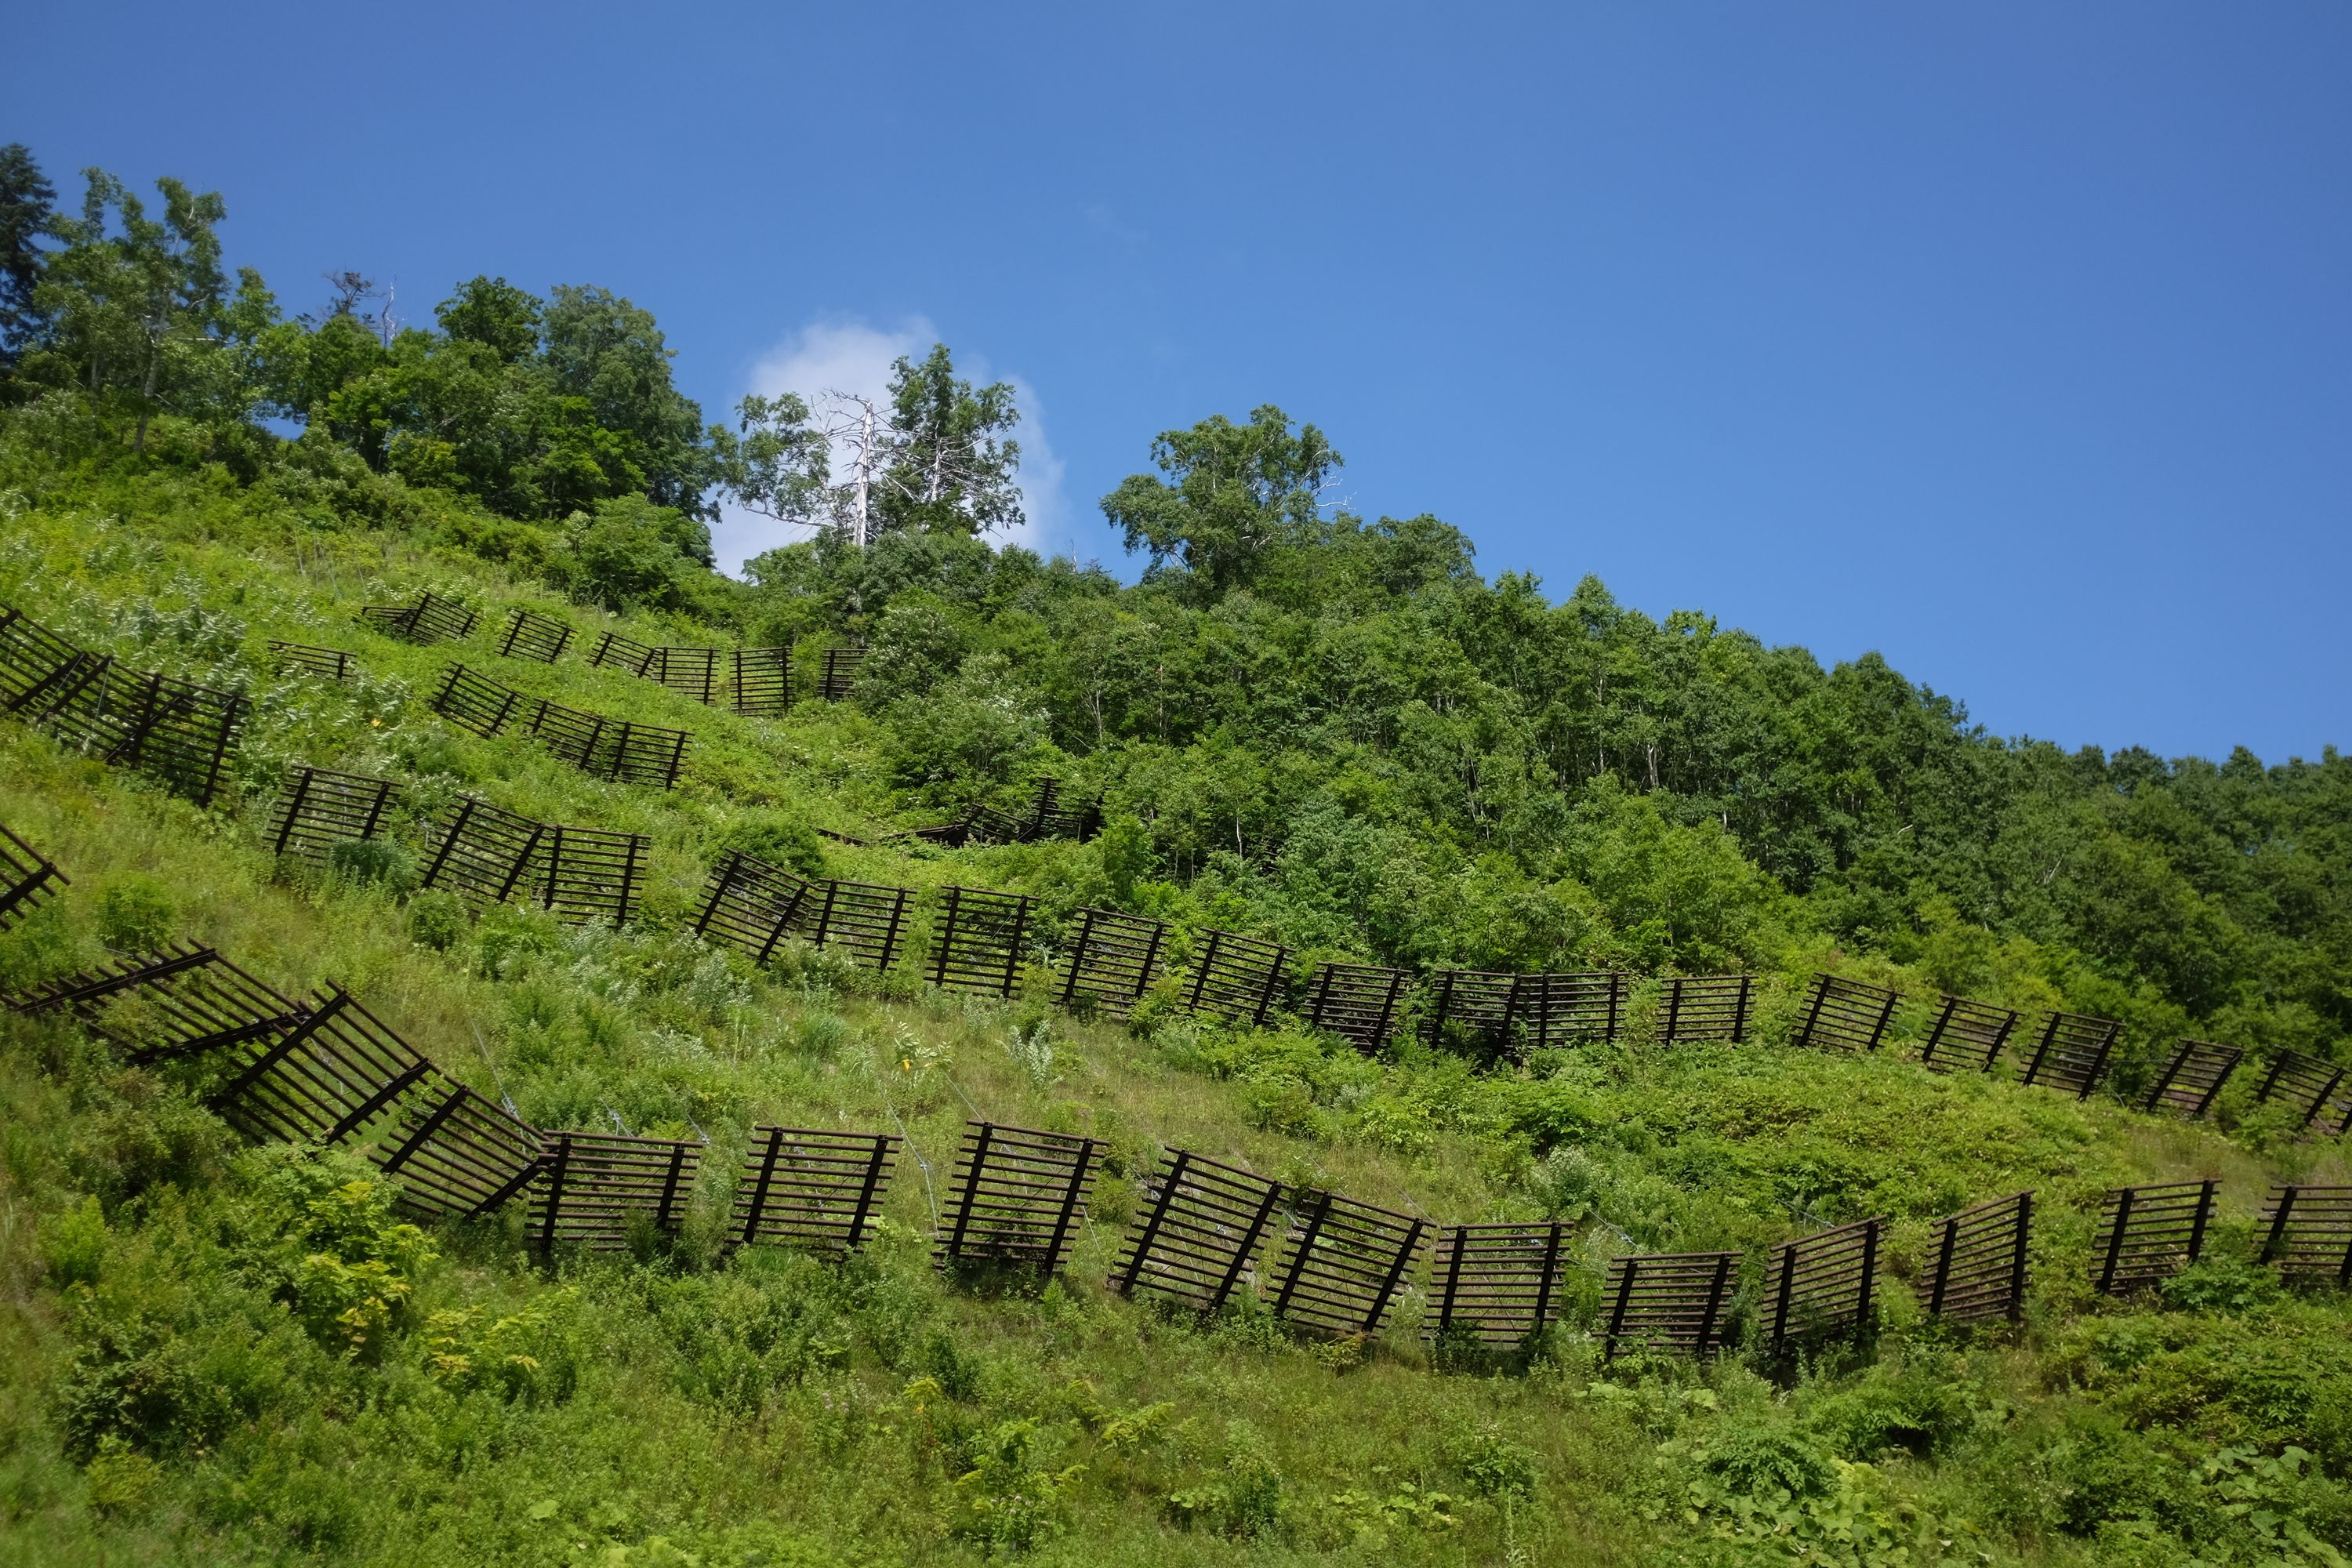 Rows of snow fences on a bright green hillside.